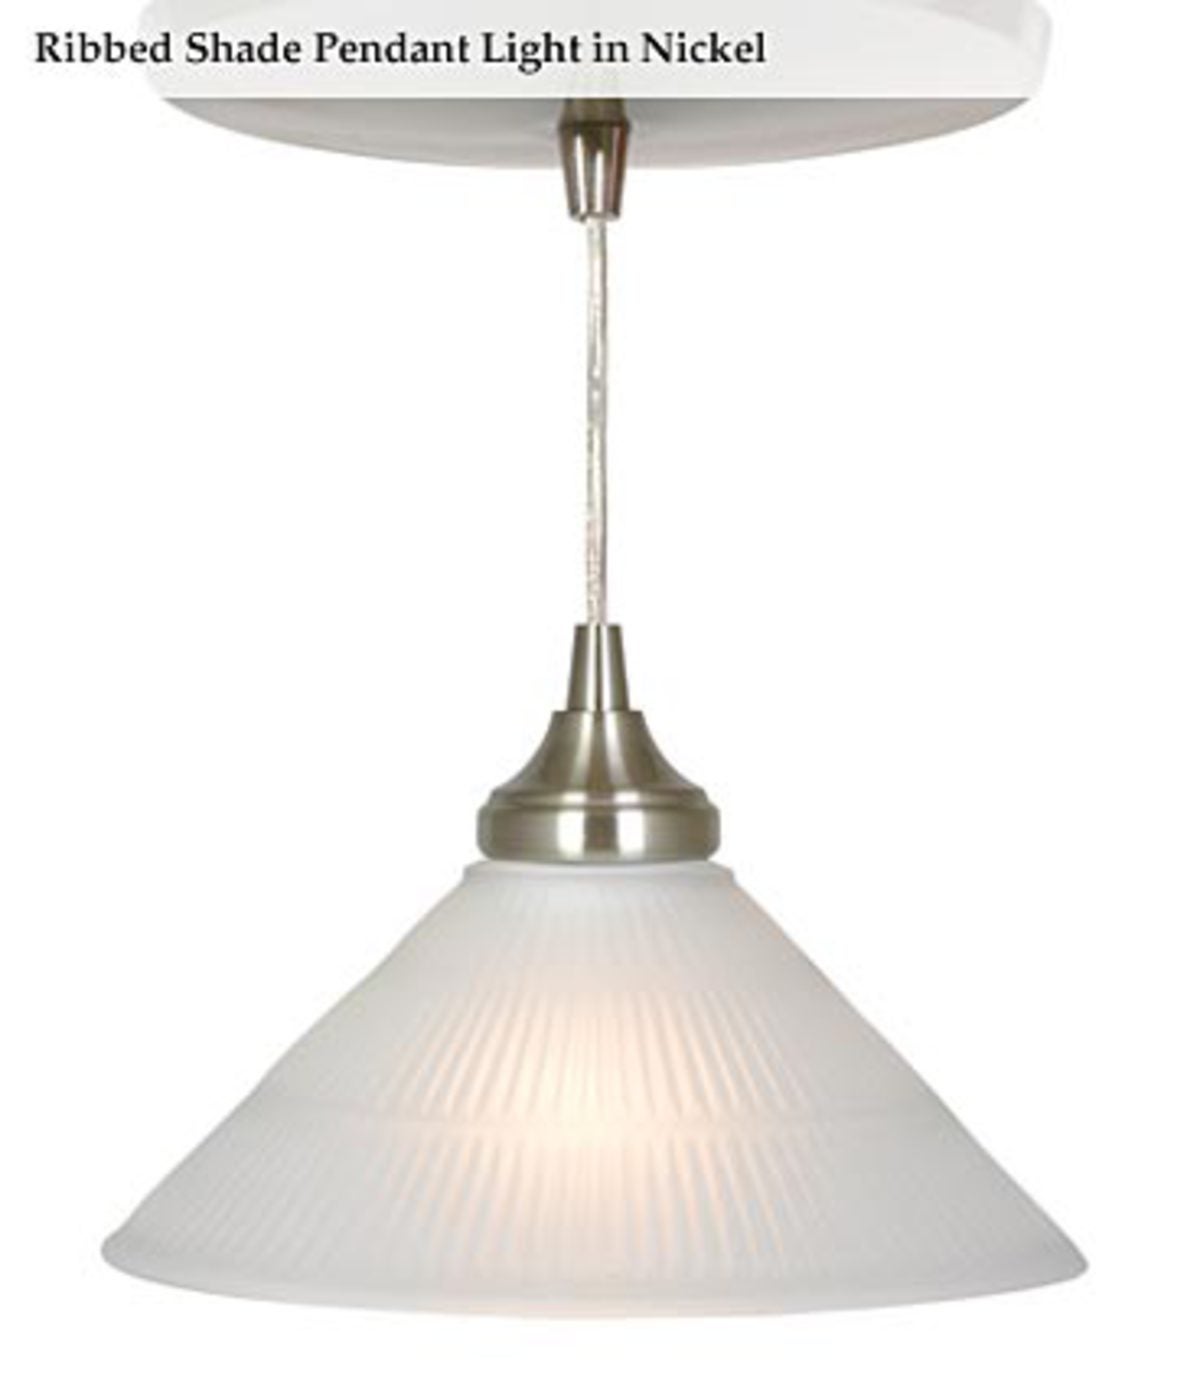 Easy Install Screw In Glass Pendant Light With Ribbed Shade Nickel Plow And Hearth